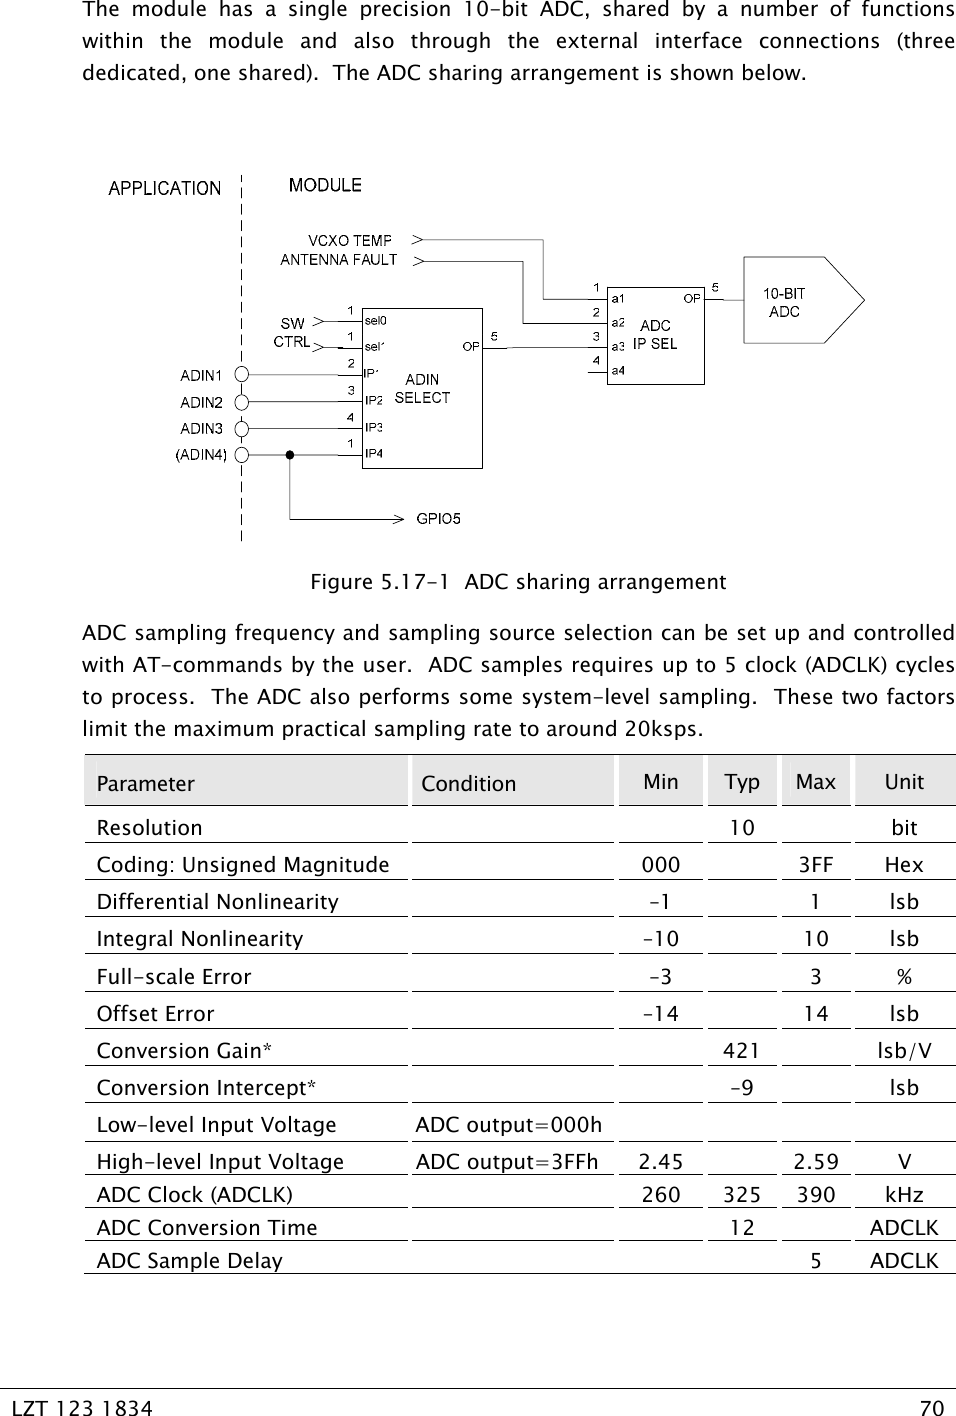   LZT 123 1834  70   The module has a single precision 10-bit ADC, shared by a number of functions within the module and also through the external interface connections (three dedicated, one shared).  The ADC sharing arrangement is shown below.   Figure 5.17-1  ADC sharing arrangement ADC sampling frequency and sampling source selection can be set up and controlled with AT-commands by the user.  ADC samples requires up to 5 clock (ADCLK) cycles to process.  The ADC also performs some system-level sampling.  These two factors limit the maximum practical sampling rate to around 20ksps. Parameter  Condition  Min  Typ  Max  Unit Resolution    10  bit Coding: Unsigned Magnitude    000    3FF  Hex Differential Nonlinearity    –1    1  lsb Integral Nonlinearity    –10    10  lsb Full-scale Error    –3    3  % Offset Error    –14    14  lsb Conversion Gain*      421    lsb/V Conversion Intercept*      –9    lsb Low-level Input Voltage  ADC output=000h        High-level Input Voltage  ADC output=3FFh  2.45    2.59  V ADC Clock (ADCLK)    260  325  390  kHz ADC Conversion Time      12    ADCLK ADC Sample Delay        5  ADCLK 